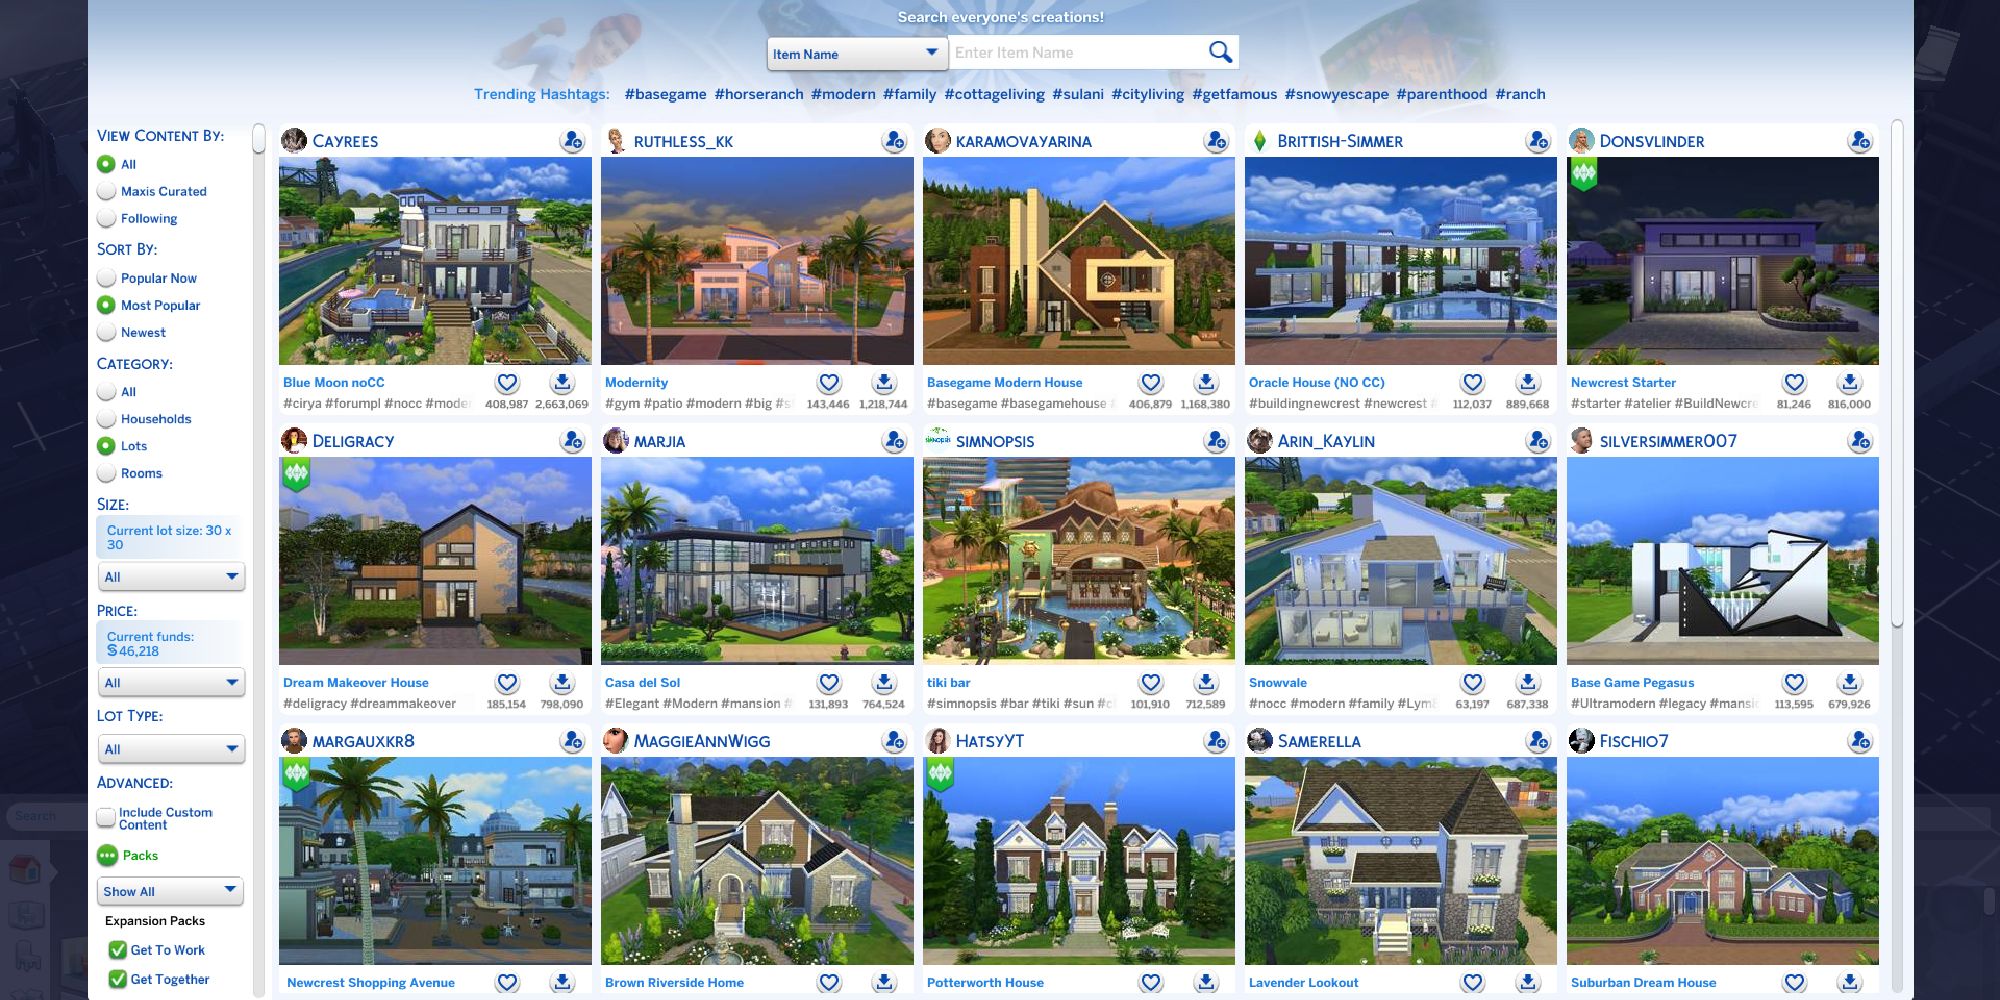 The Sims 4: 10 Spooky Builds From The Gallery That Are Perfect For